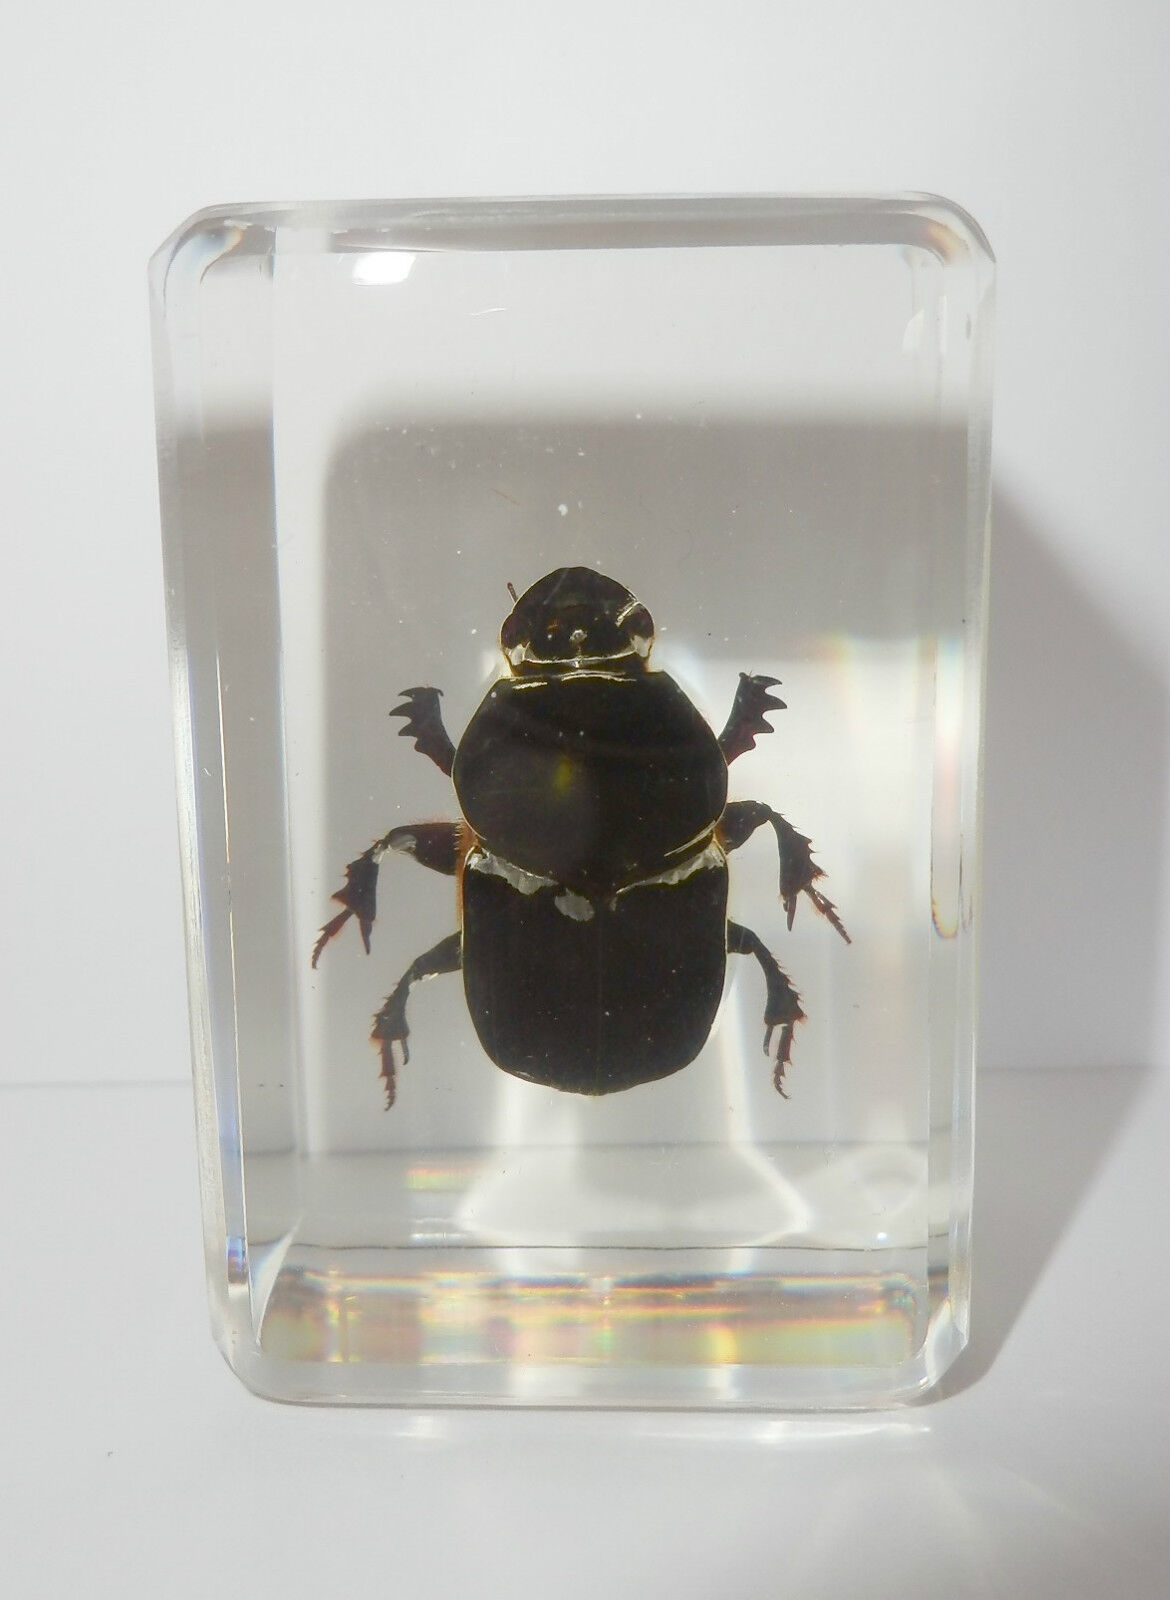 Scarab Dung Beetle (Gymnopleurus sp.) in Small Block - Education Insect Specimen